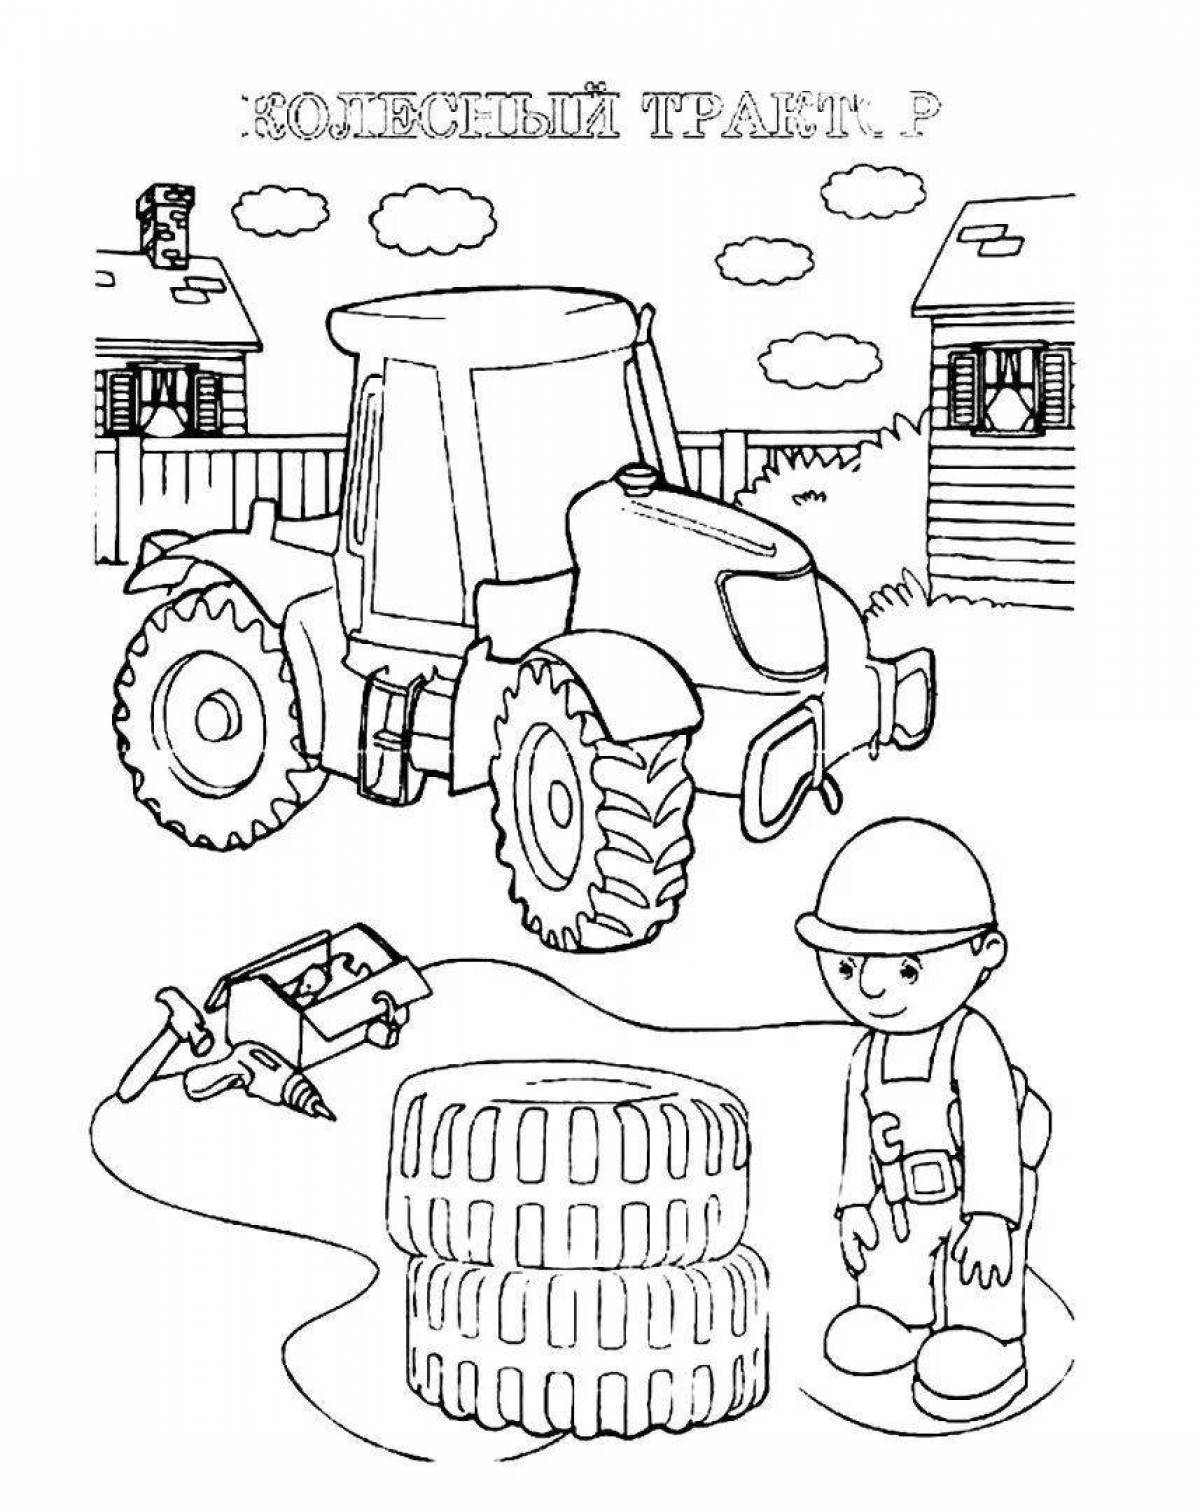 Joyful construction machinery coloring page for kids